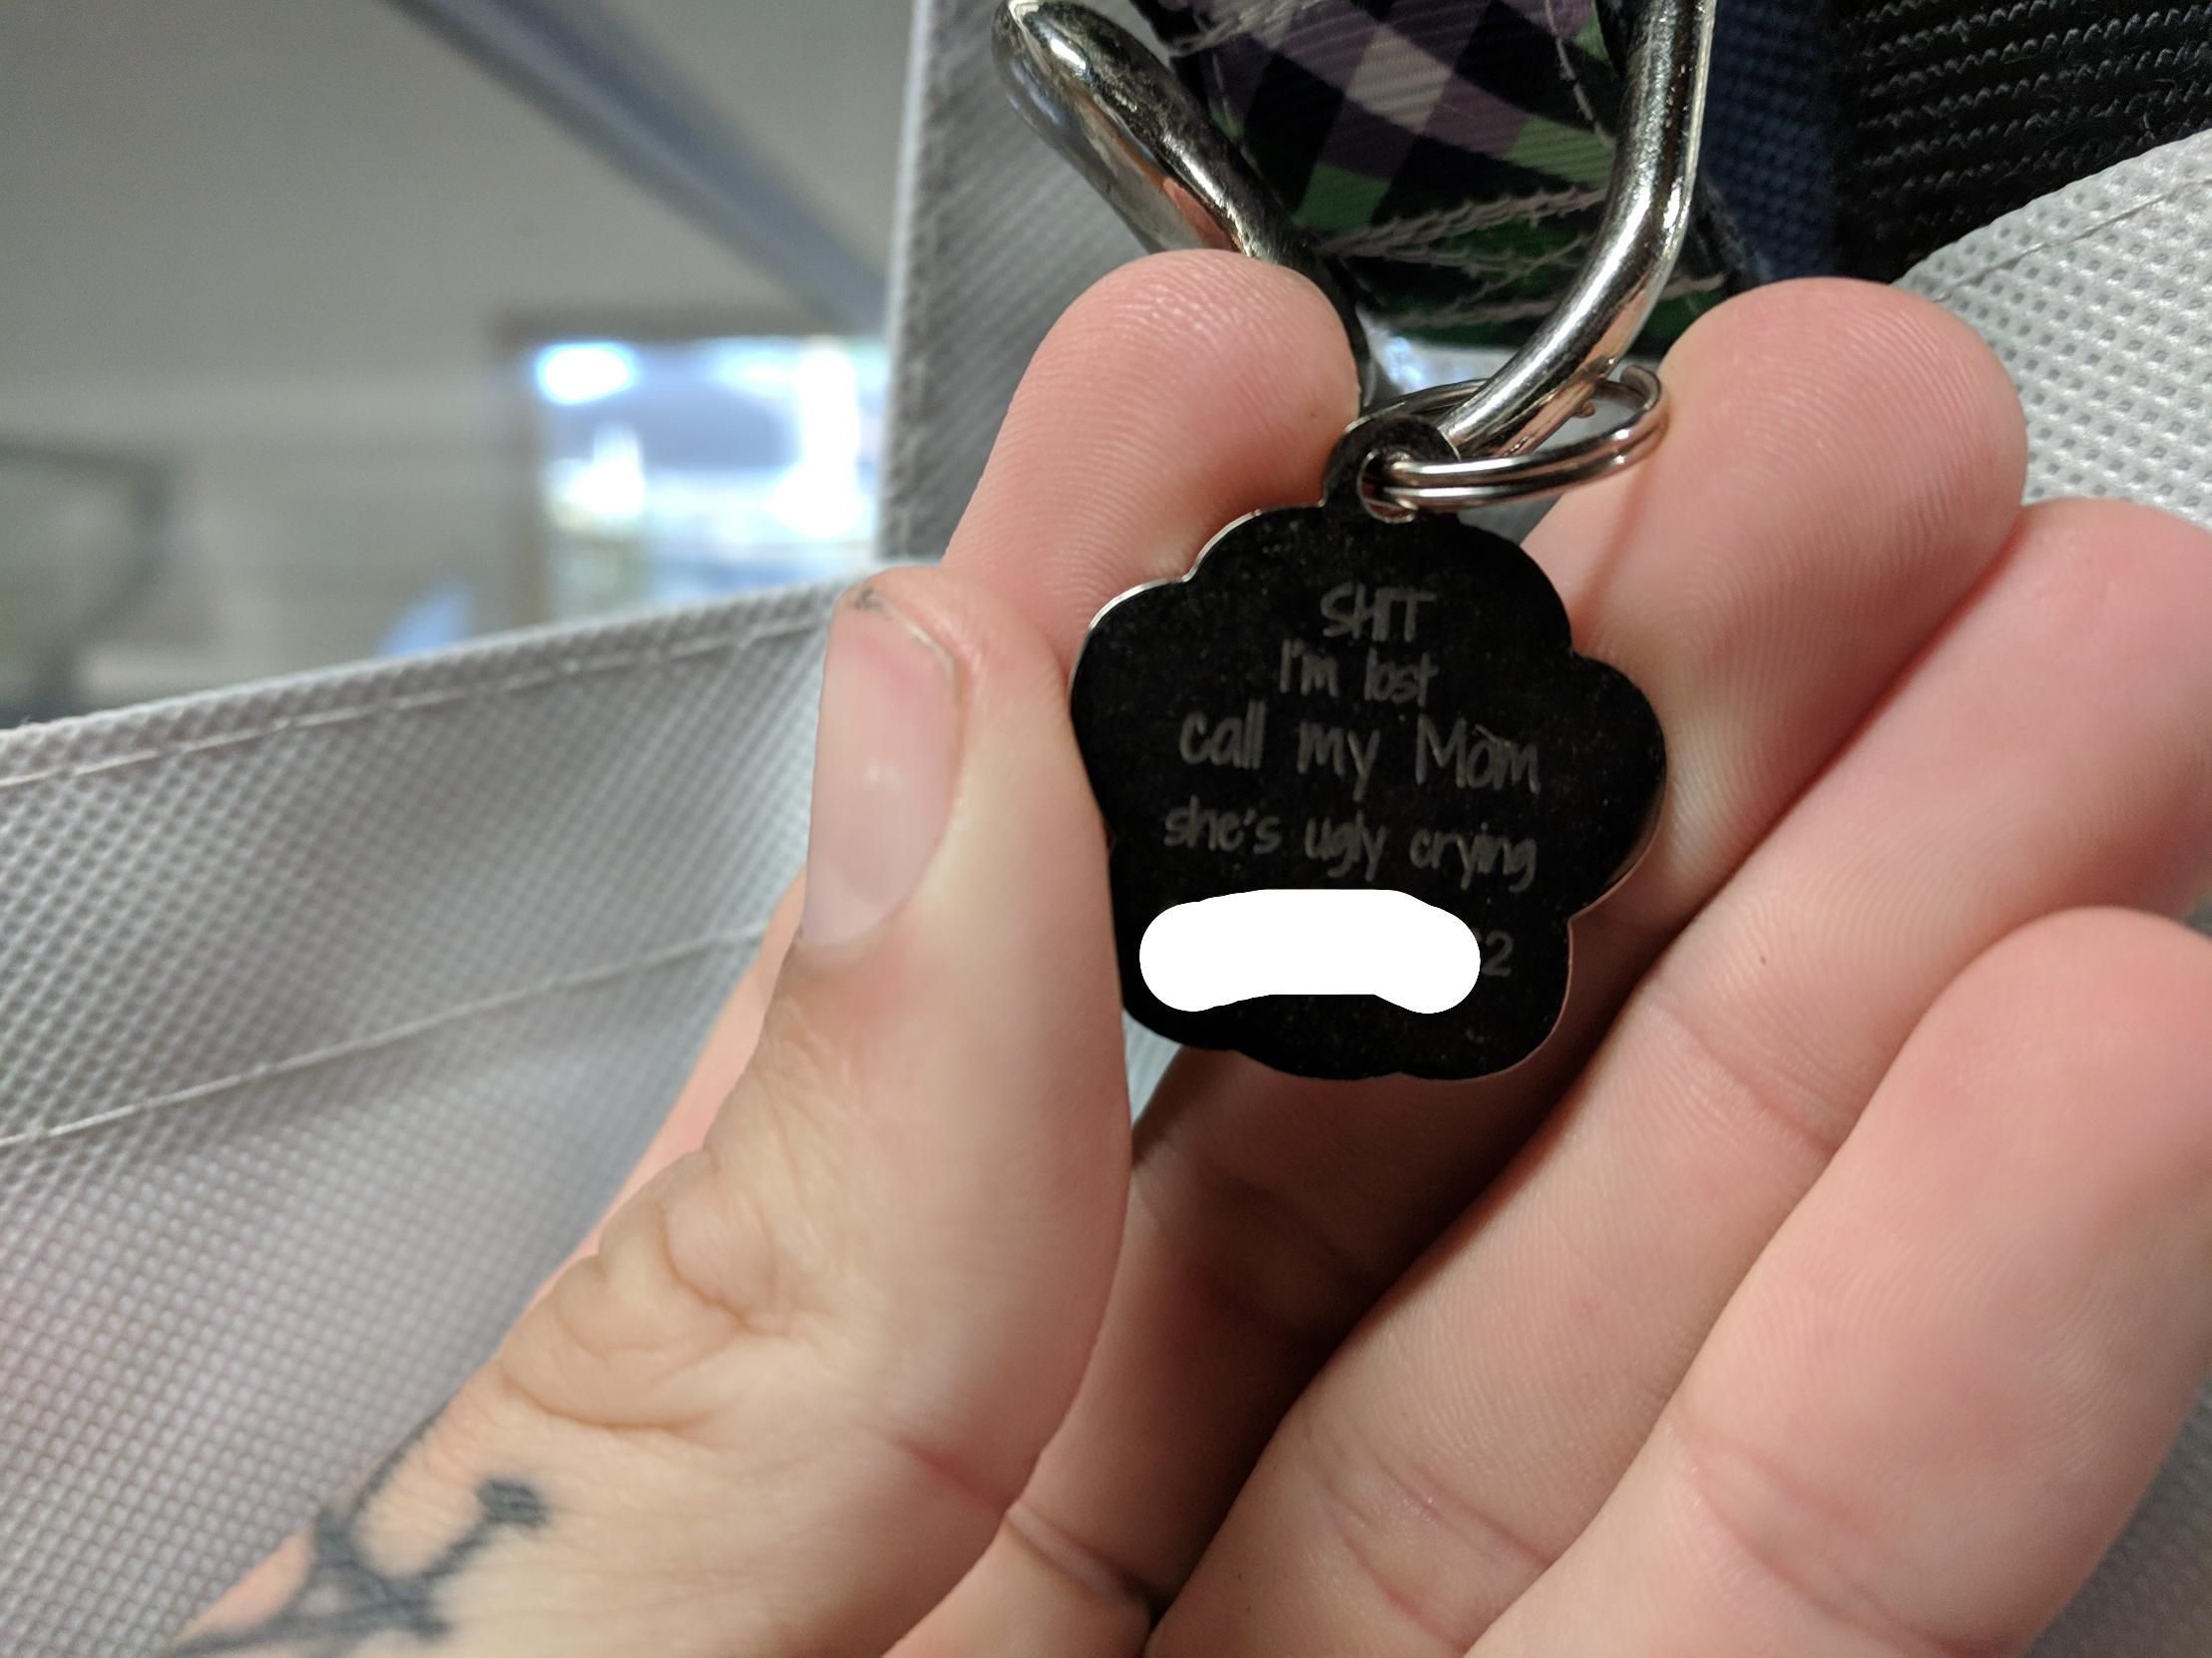 This client dog's tag